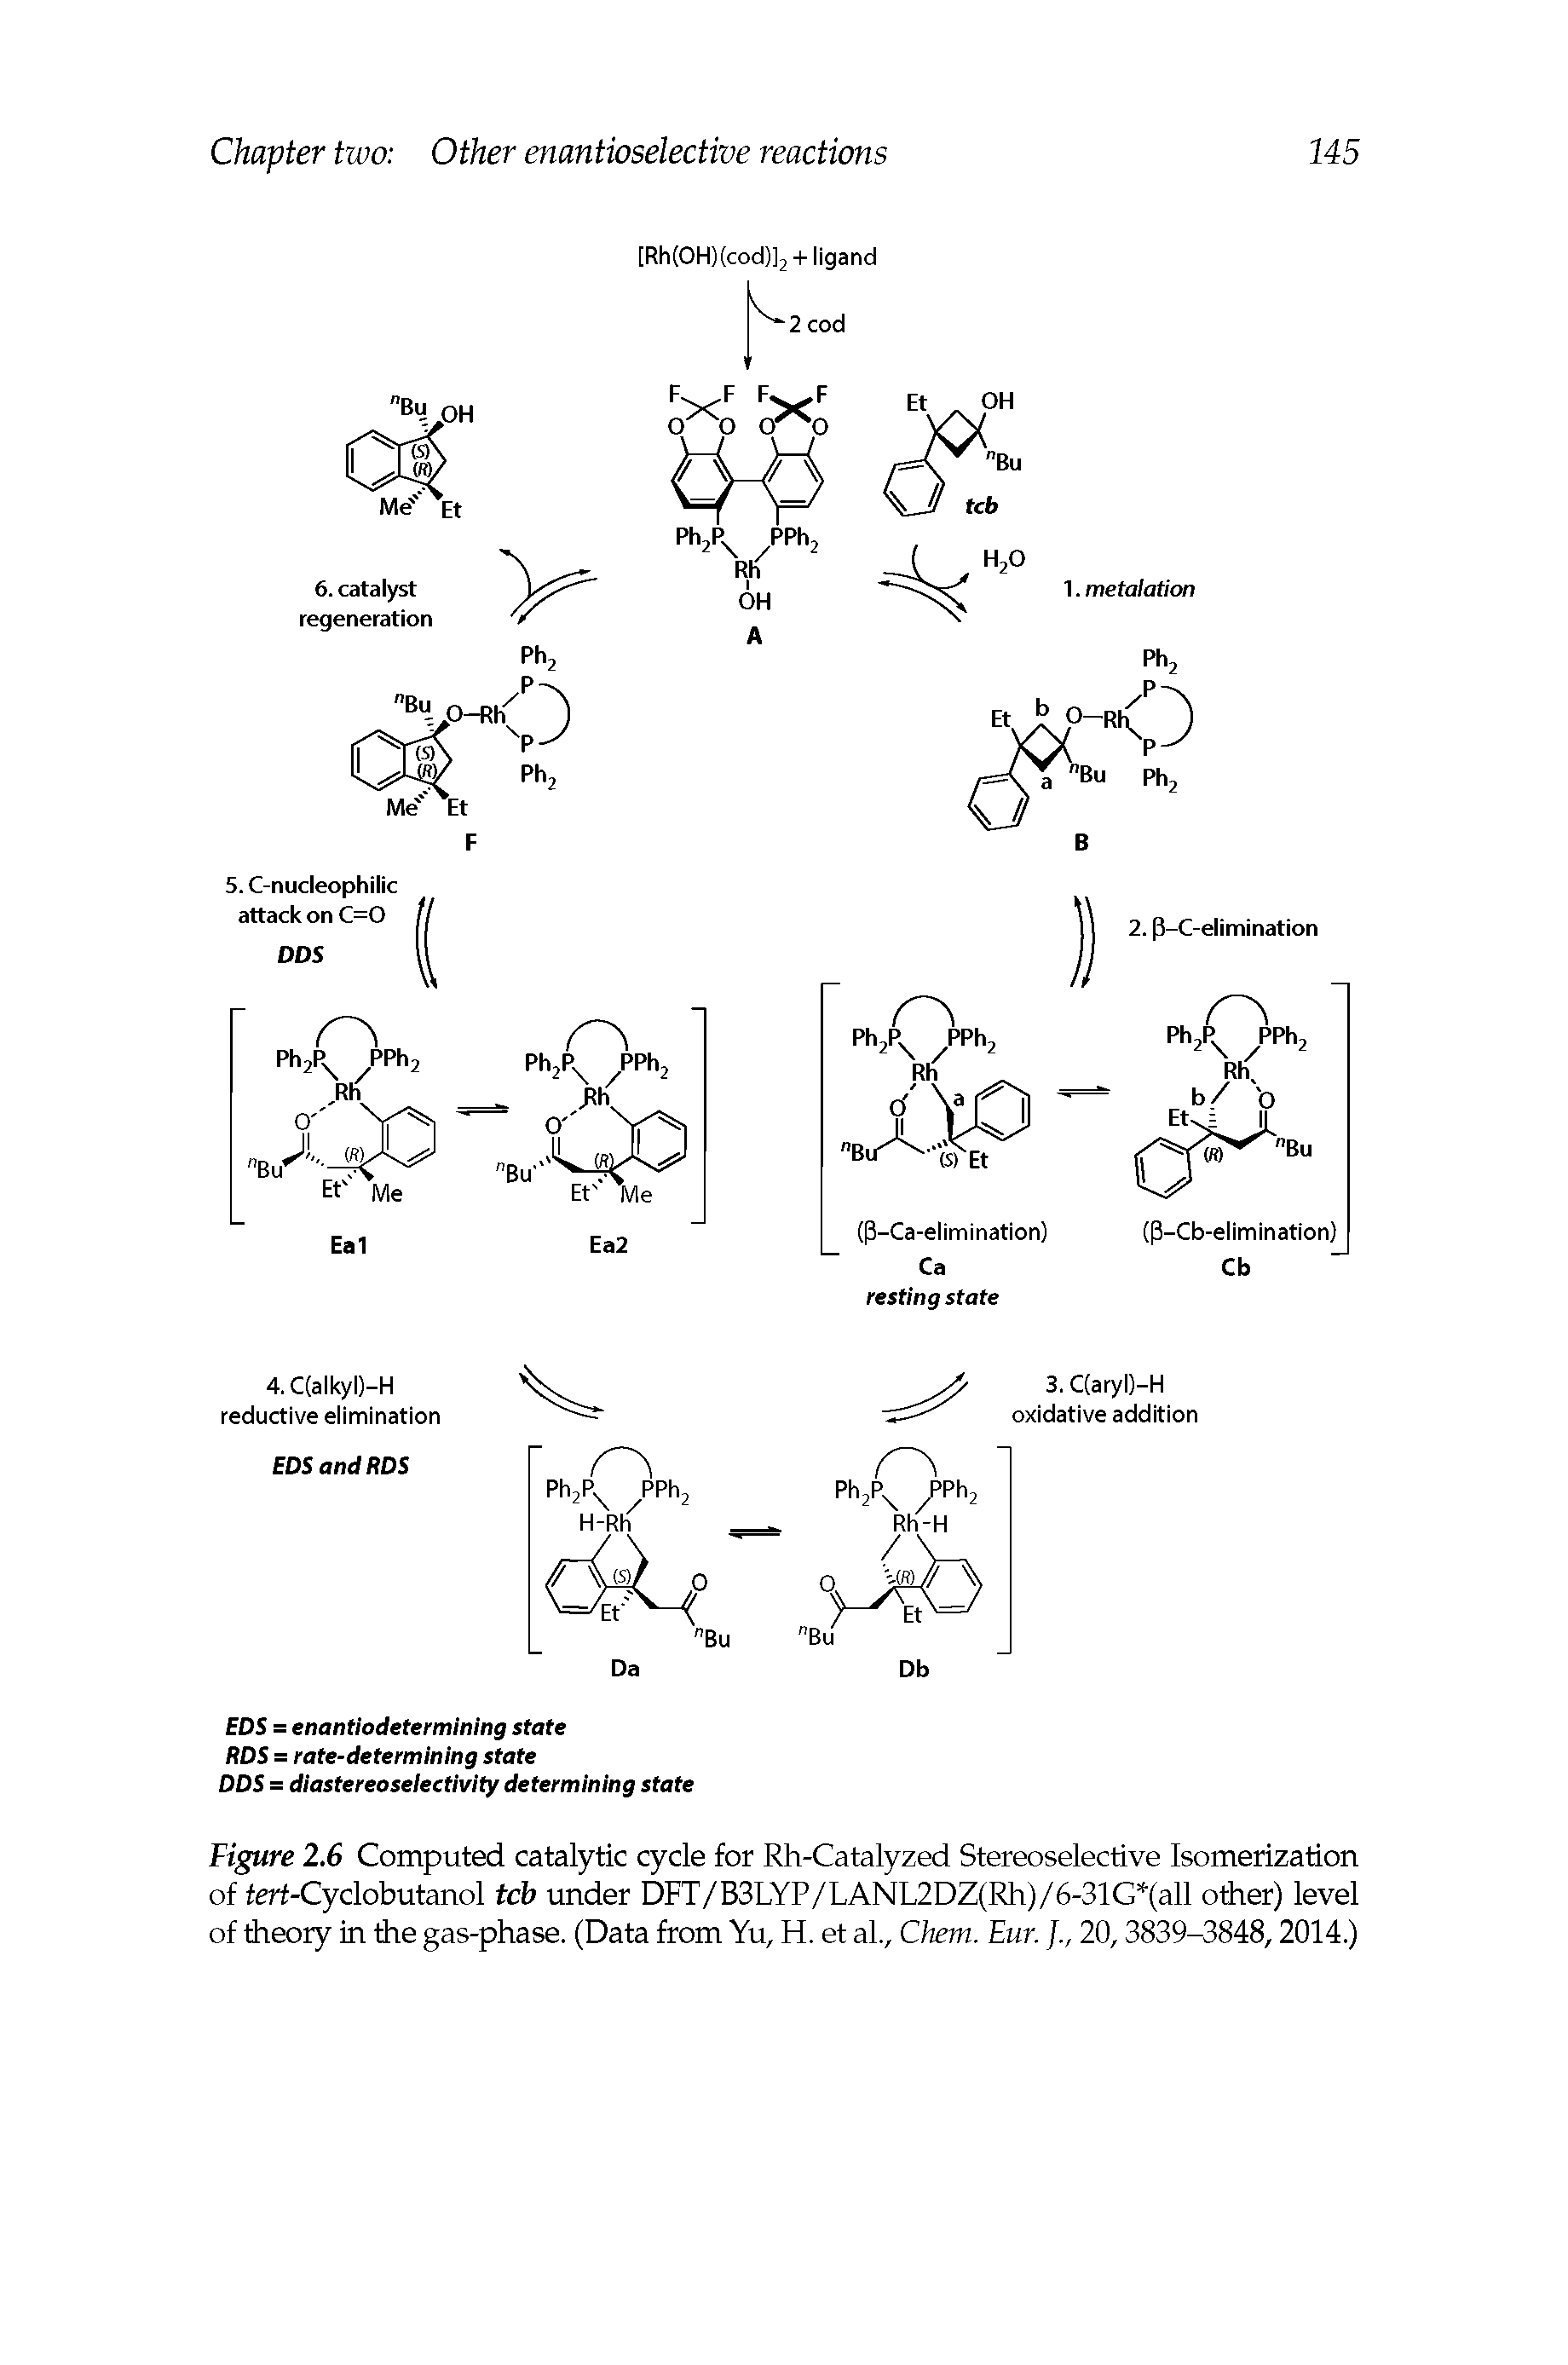 Figure 2.6 Computed catalytic cycle for Rh-Catalyzed Stereoselective Isomerizatioit of fert-Cyclobutanol tcb imder DFT/B3LYP/LANL2DZ(Rh)/6-31G (all other) level of fheoiy in the gas-phase. (Data from Yu, H. et al., Chem. Fur.., 20,3839-3848,2014.)...